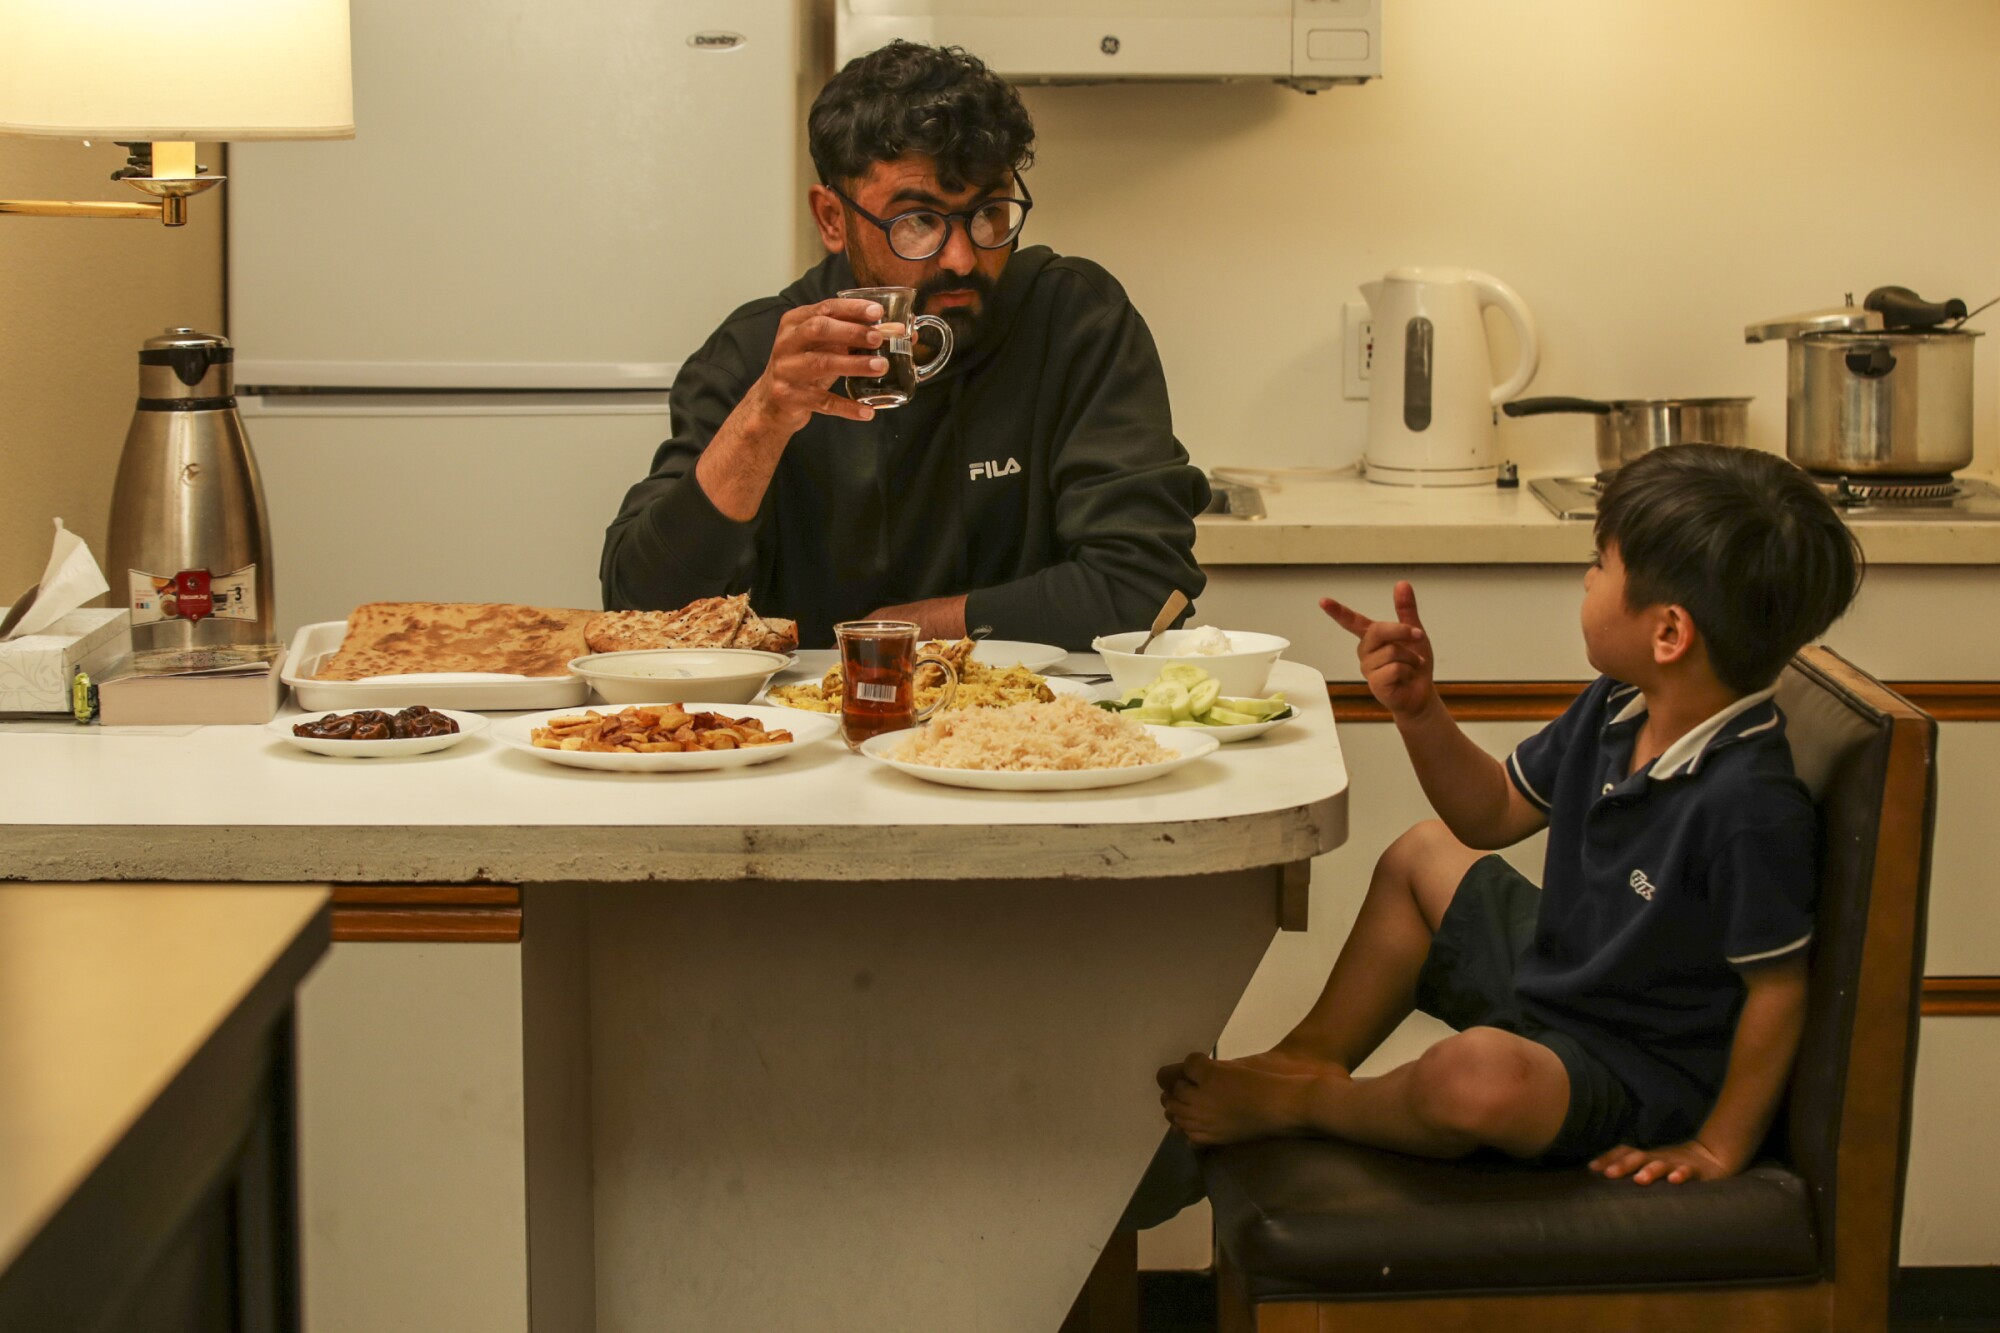 Zabih Khan, left, and his brother Mojib have dinner in their hotel room.